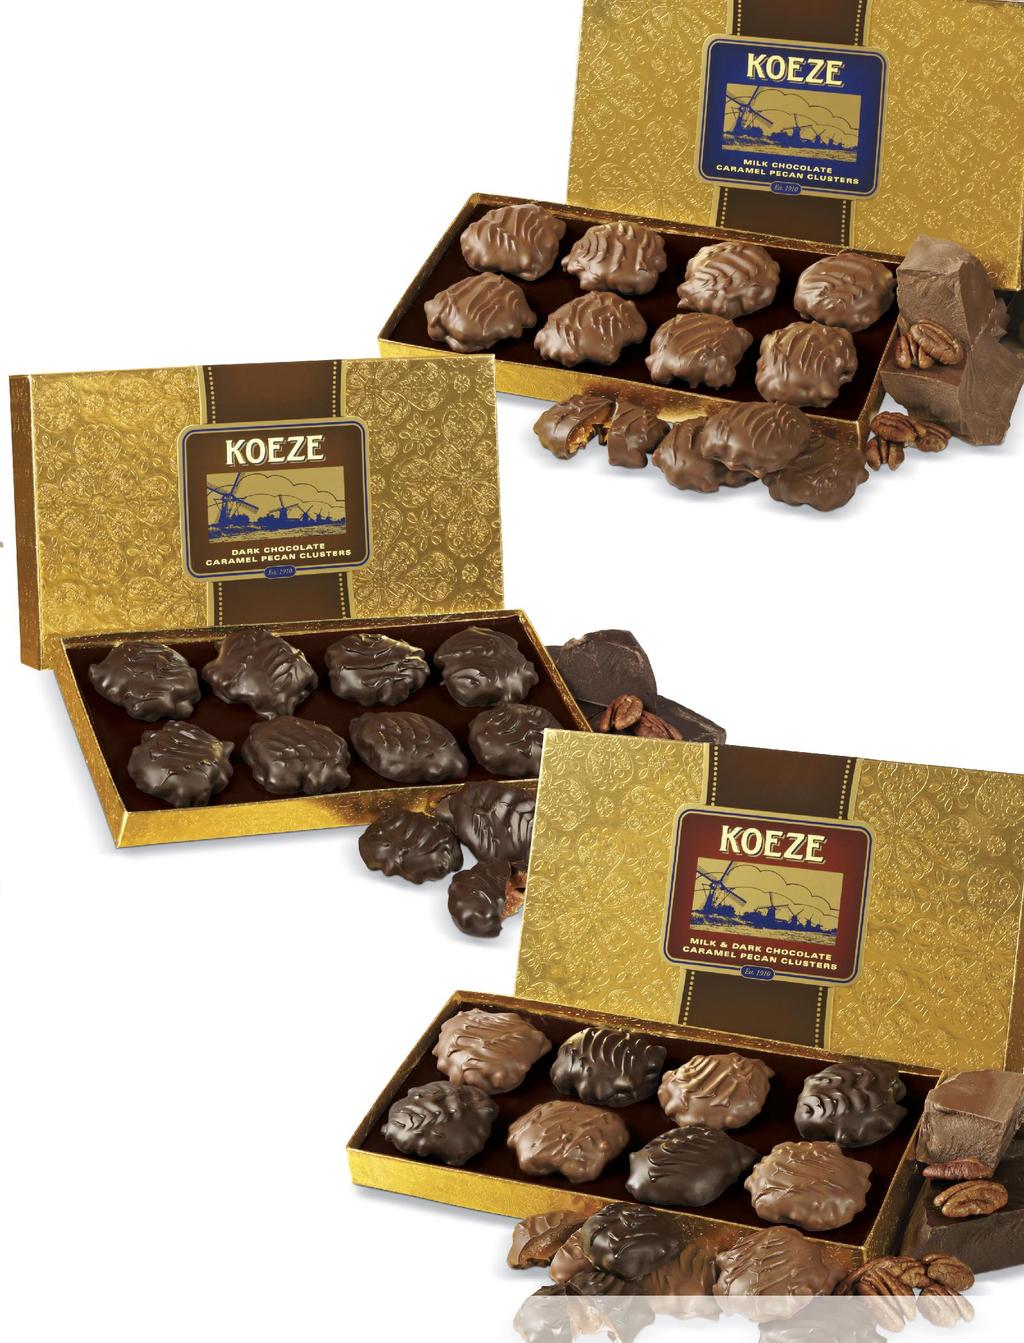 TURTLES ON PARADE MILK CHOCOLATE TURTLES The finest turtles, made with our exclusive soft caramel recipe, dolloped onto Southern pecan pieces and covered in silky milk chocolate.